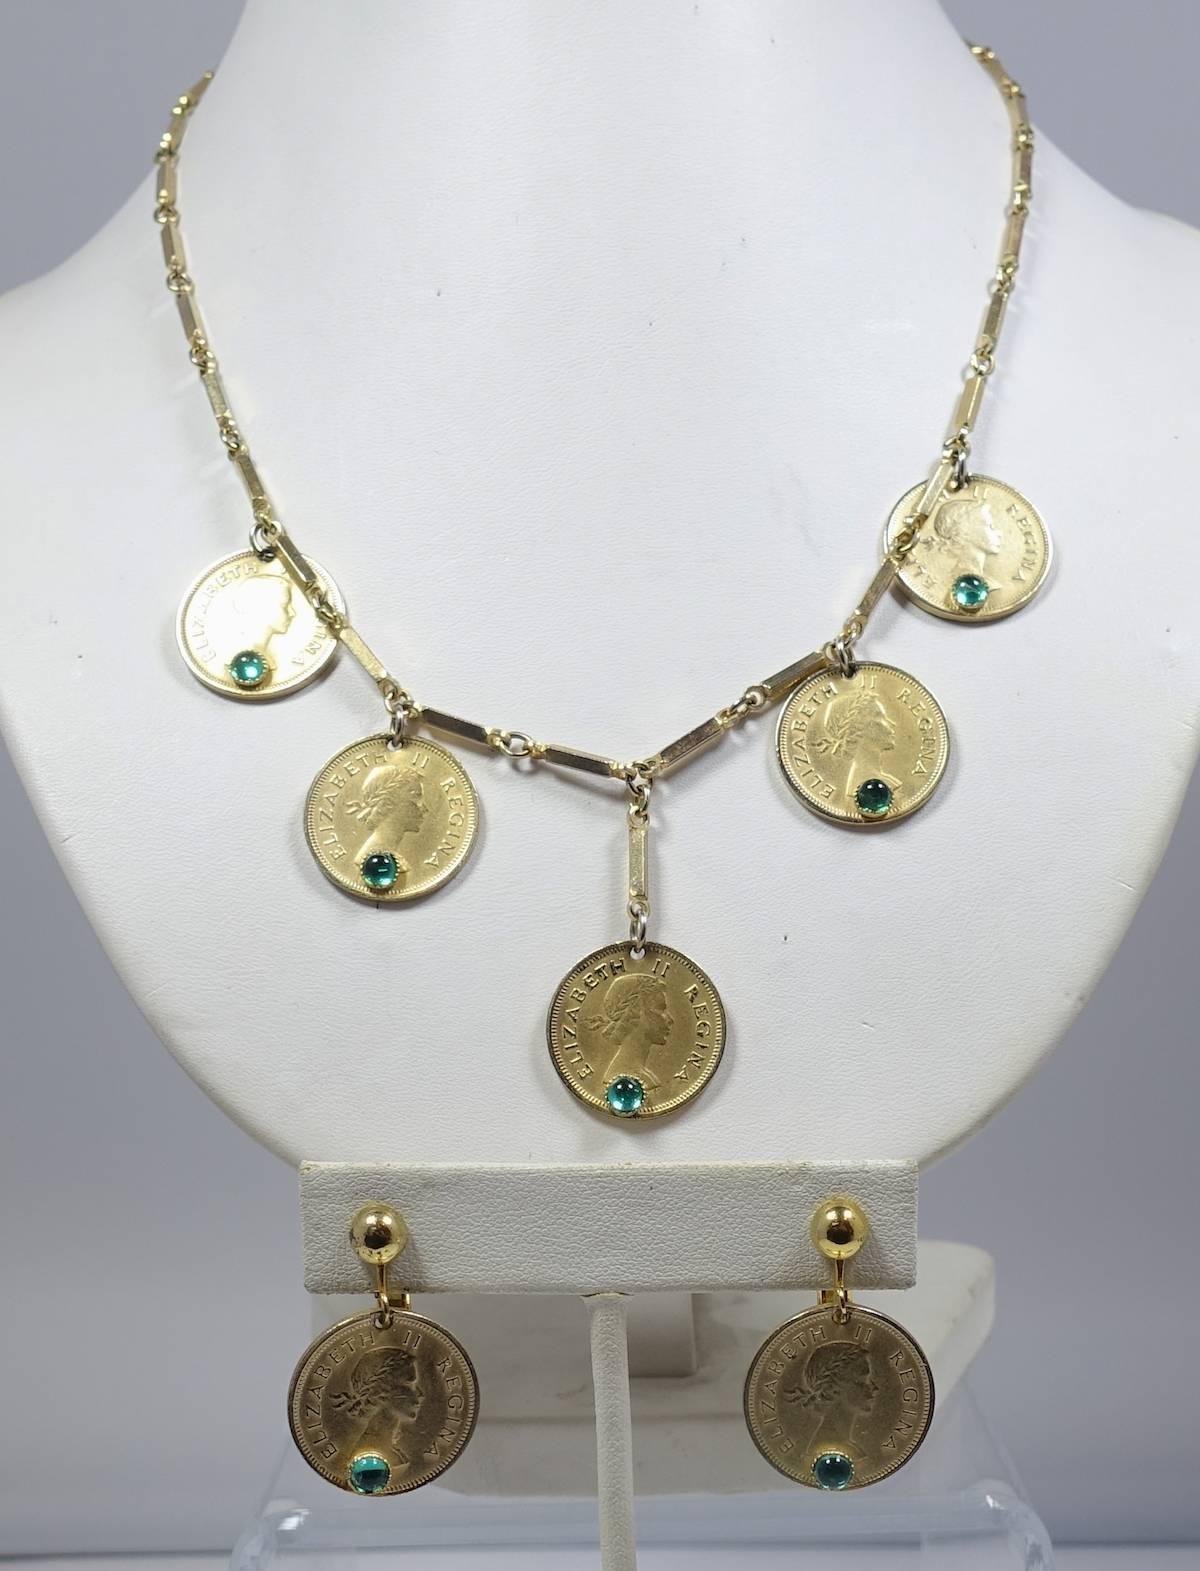 This vintage set features South African faux coins with green cabochon glass accents in a gold tone metal setting.  The necklace measures 18-1/2” long with a spring closure and each coin is 3/4” wide. The matching clip earrings hangs 3/4